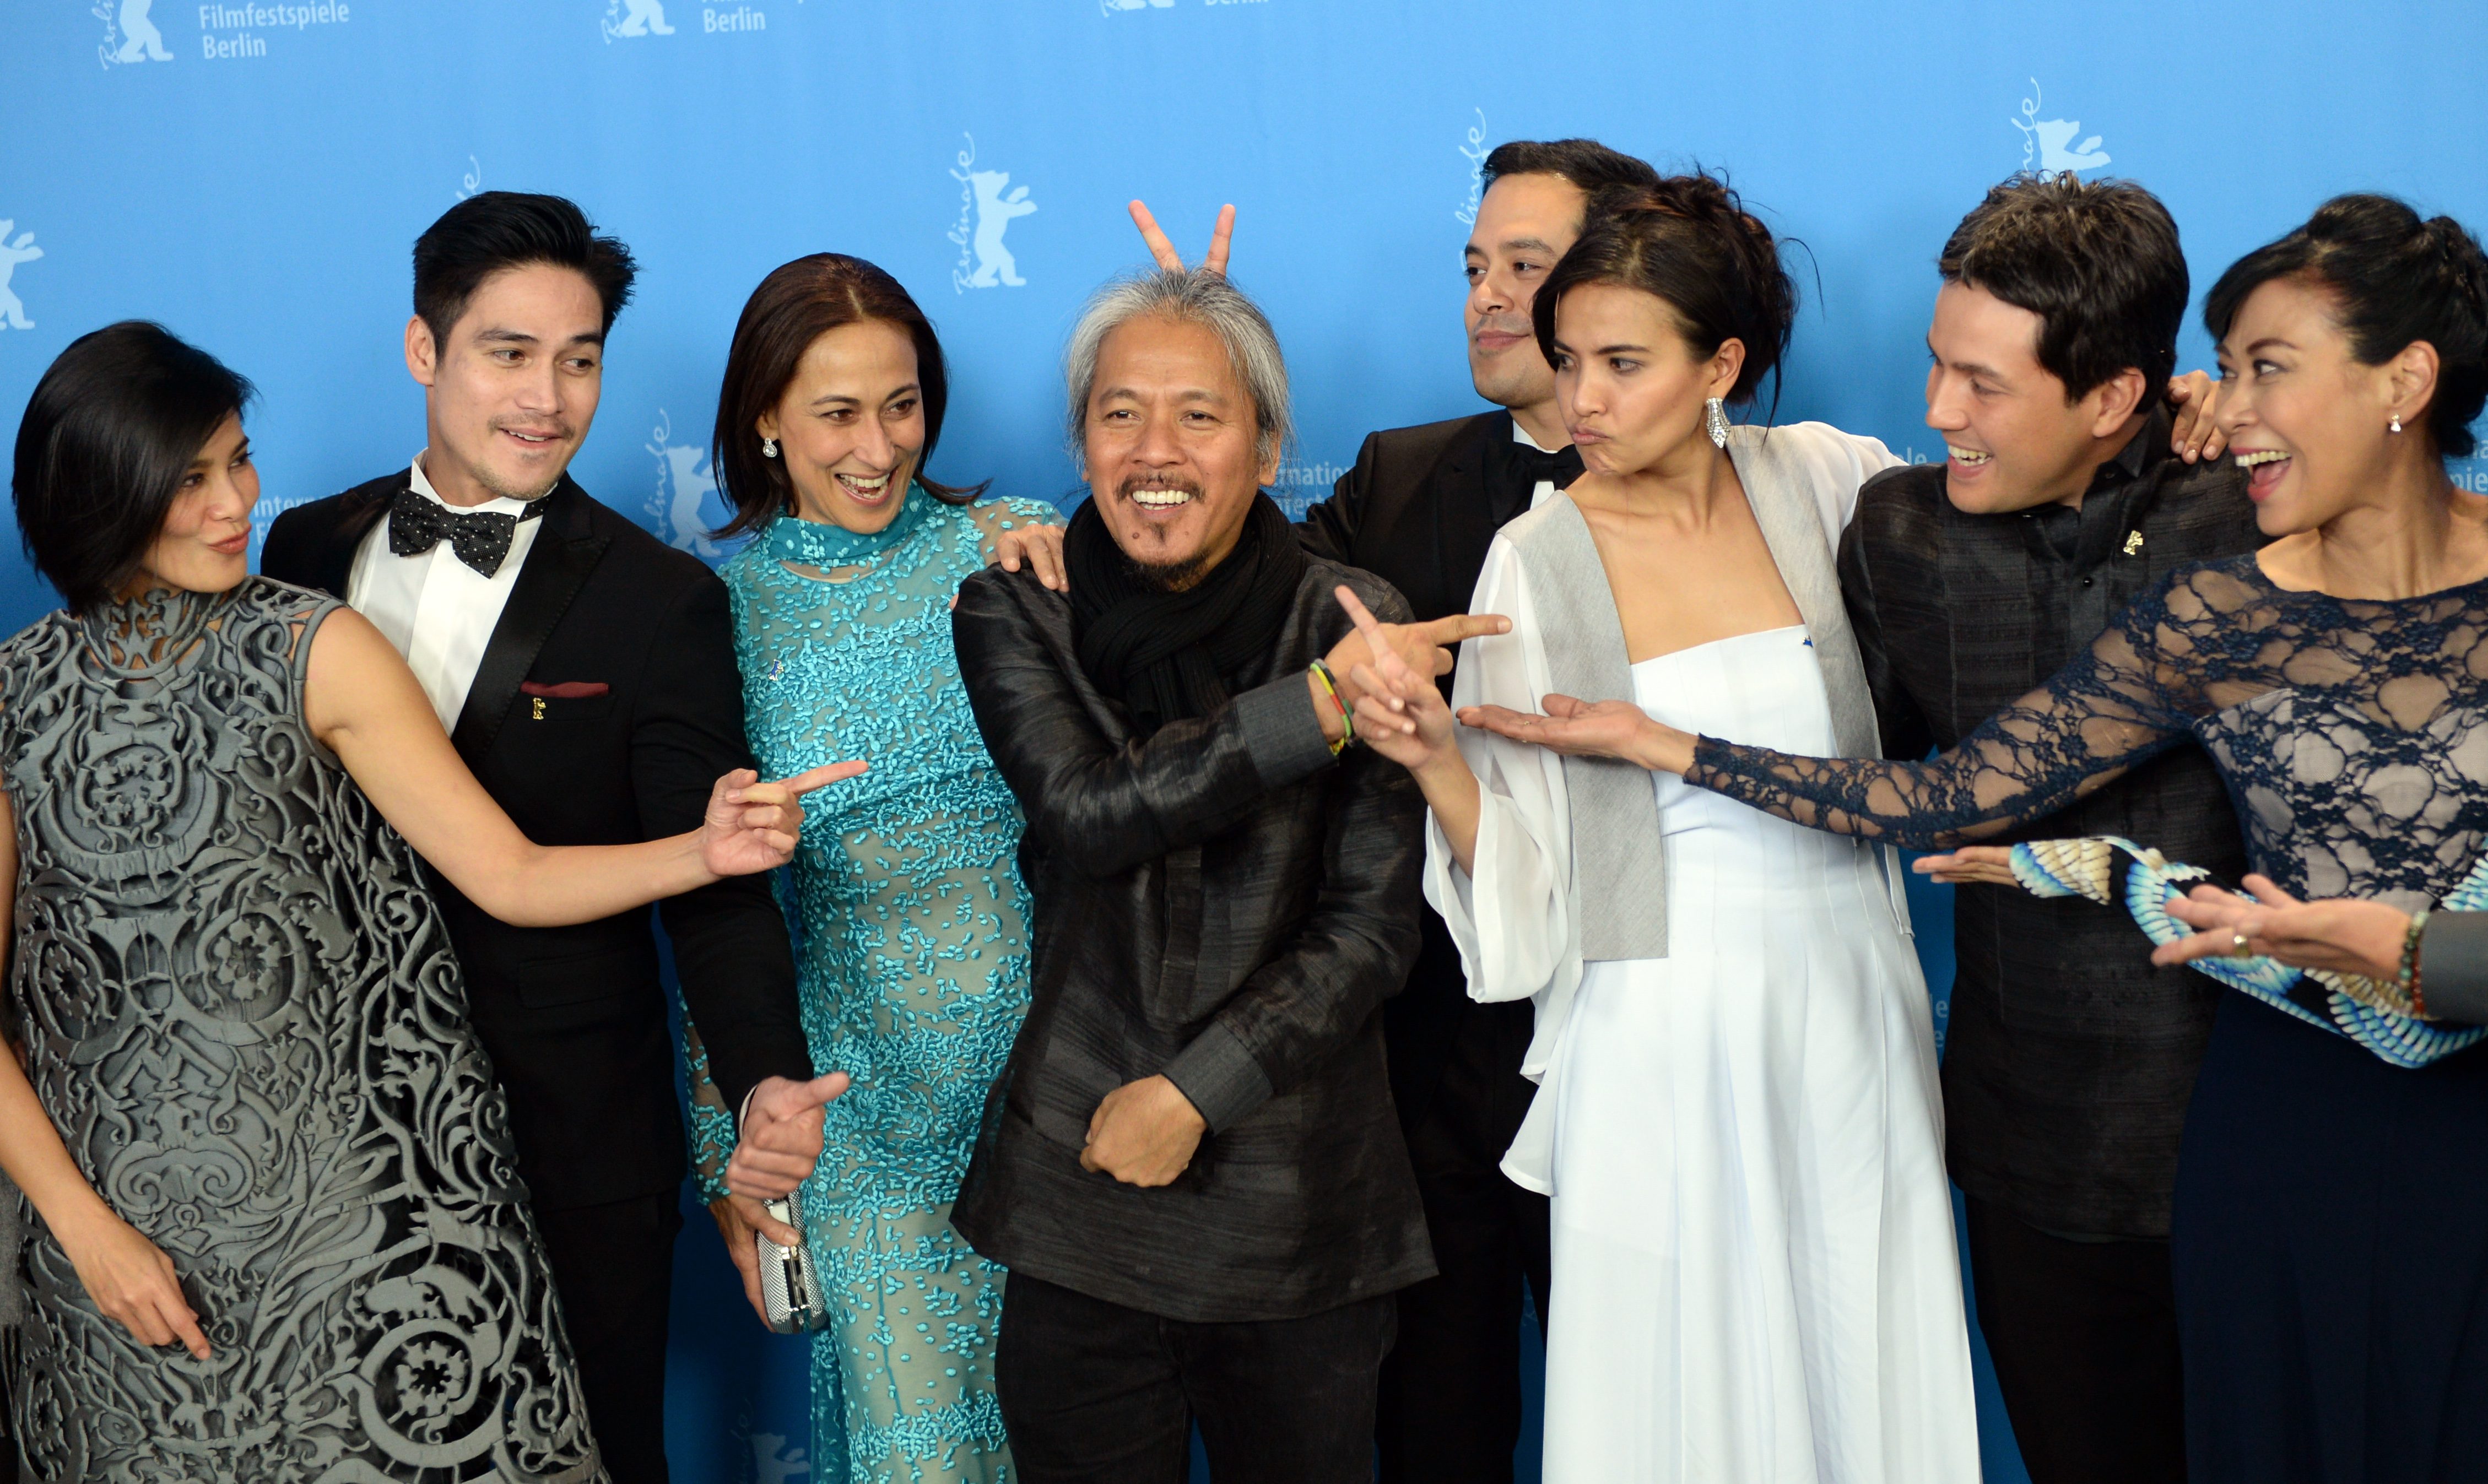 Angel Aquino (L-R), Piolo Pascual, Cherie Gil, dircetor Lav Diaz, John Lloyd Cruz, Alessandra De Rossi, Paul Soriano and Susan Africa pose during a photocall for 'Hele Sa Hiwagang Hapis' (A Lullaby To The Sorrowful Mystery) at the 66th annual Berlin International Film Festival, in Berlin, Germany. Photo by Britta Pedersen/EPA 